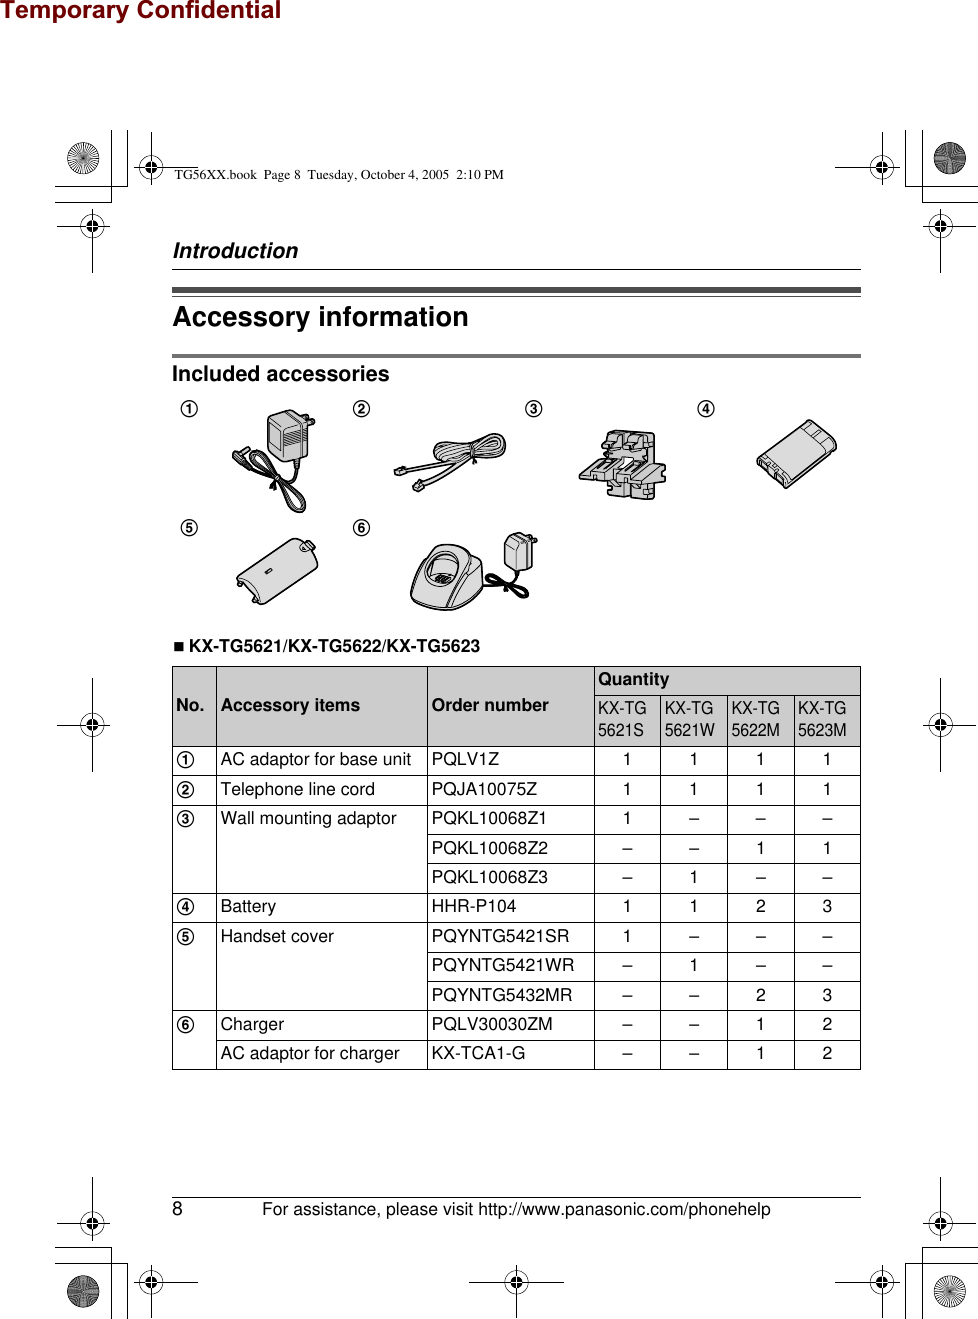 Temporary ConfidentialIntroduction8For assistance, please visit http://www.panasonic.com/phonehelpAccessory informationIncluded accessoriesNKX-TG5621/KX-TG5622/KX-TG5623123456No. Accessory items Order numberQuantityKX-TG5621S KX-TG5621W KX-TG5622M KX-TG5623M1AC adaptor for base unit PQLV1Z 1 1 1 12Telephone line cord PQJA10075Z 1 1 1 13Wall mounting adaptor PQKL10068Z1 1 – – –PQKL10068Z2 – – 1 1PQKL10068Z3 – 1 – –4Battery HHR-P104 11235Handset cover PQYNTG5421SR 1 – – –PQYNTG5421WR – 1 – –PQYNTG5432MR – – 2 36Charger PQLV30030ZM – – 1 2AC adaptor for charger KX-TCA1-G – – 1 2TG56XX.book  Page 8  Tuesday, October 4, 2005  2:10 PM